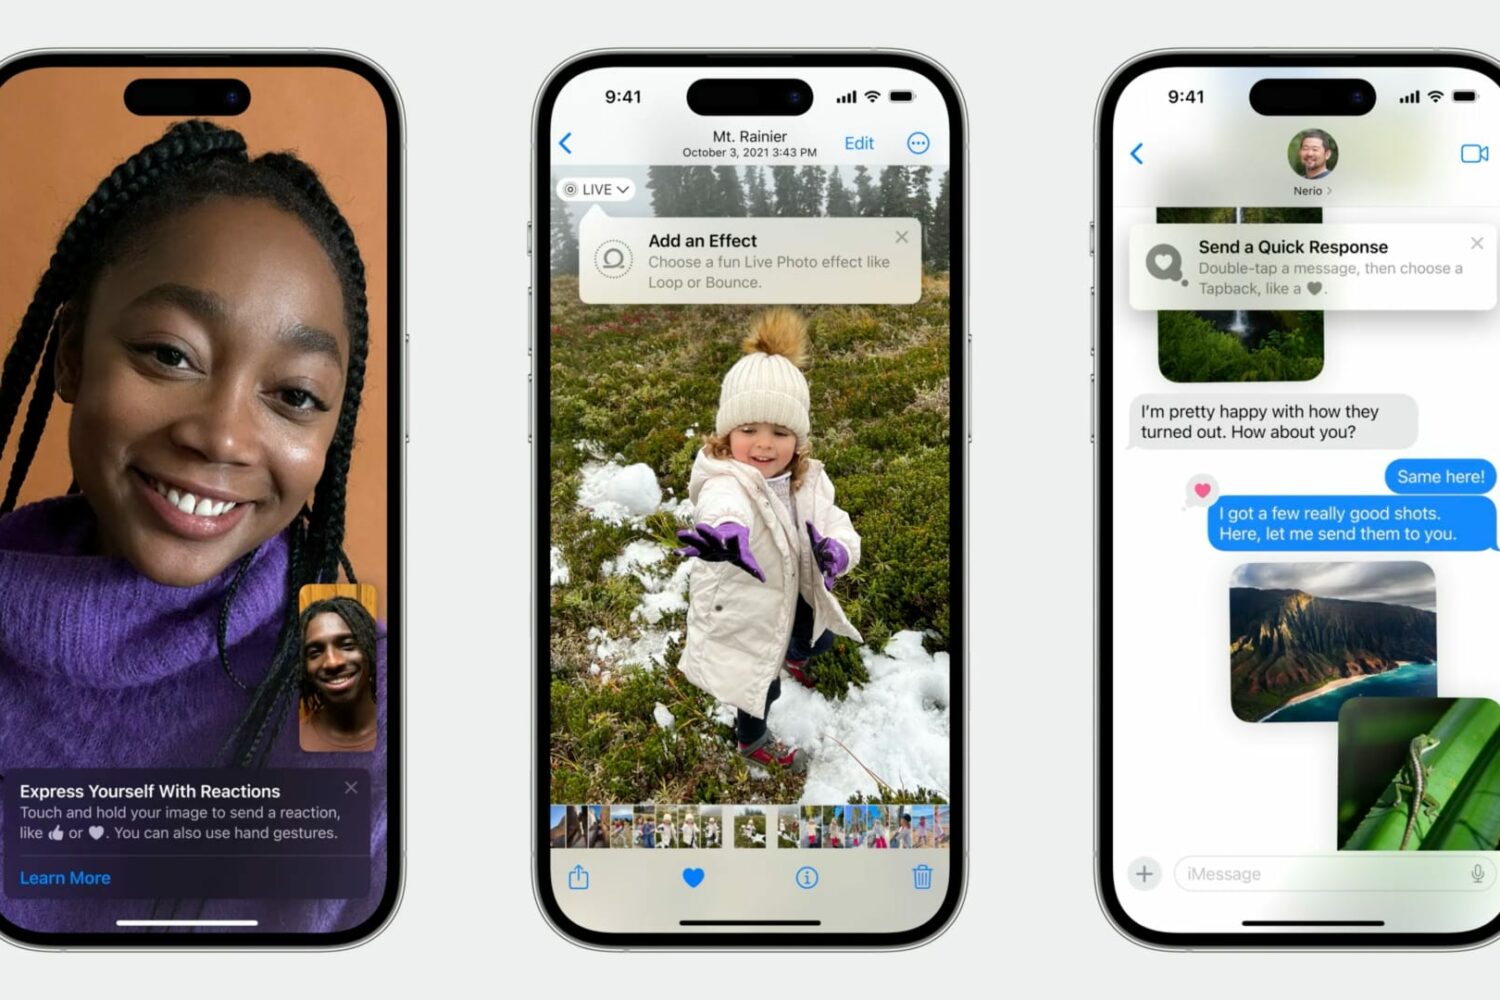 Three iPhone screenshots showing tooltips in FaceTime, Photos and Messages